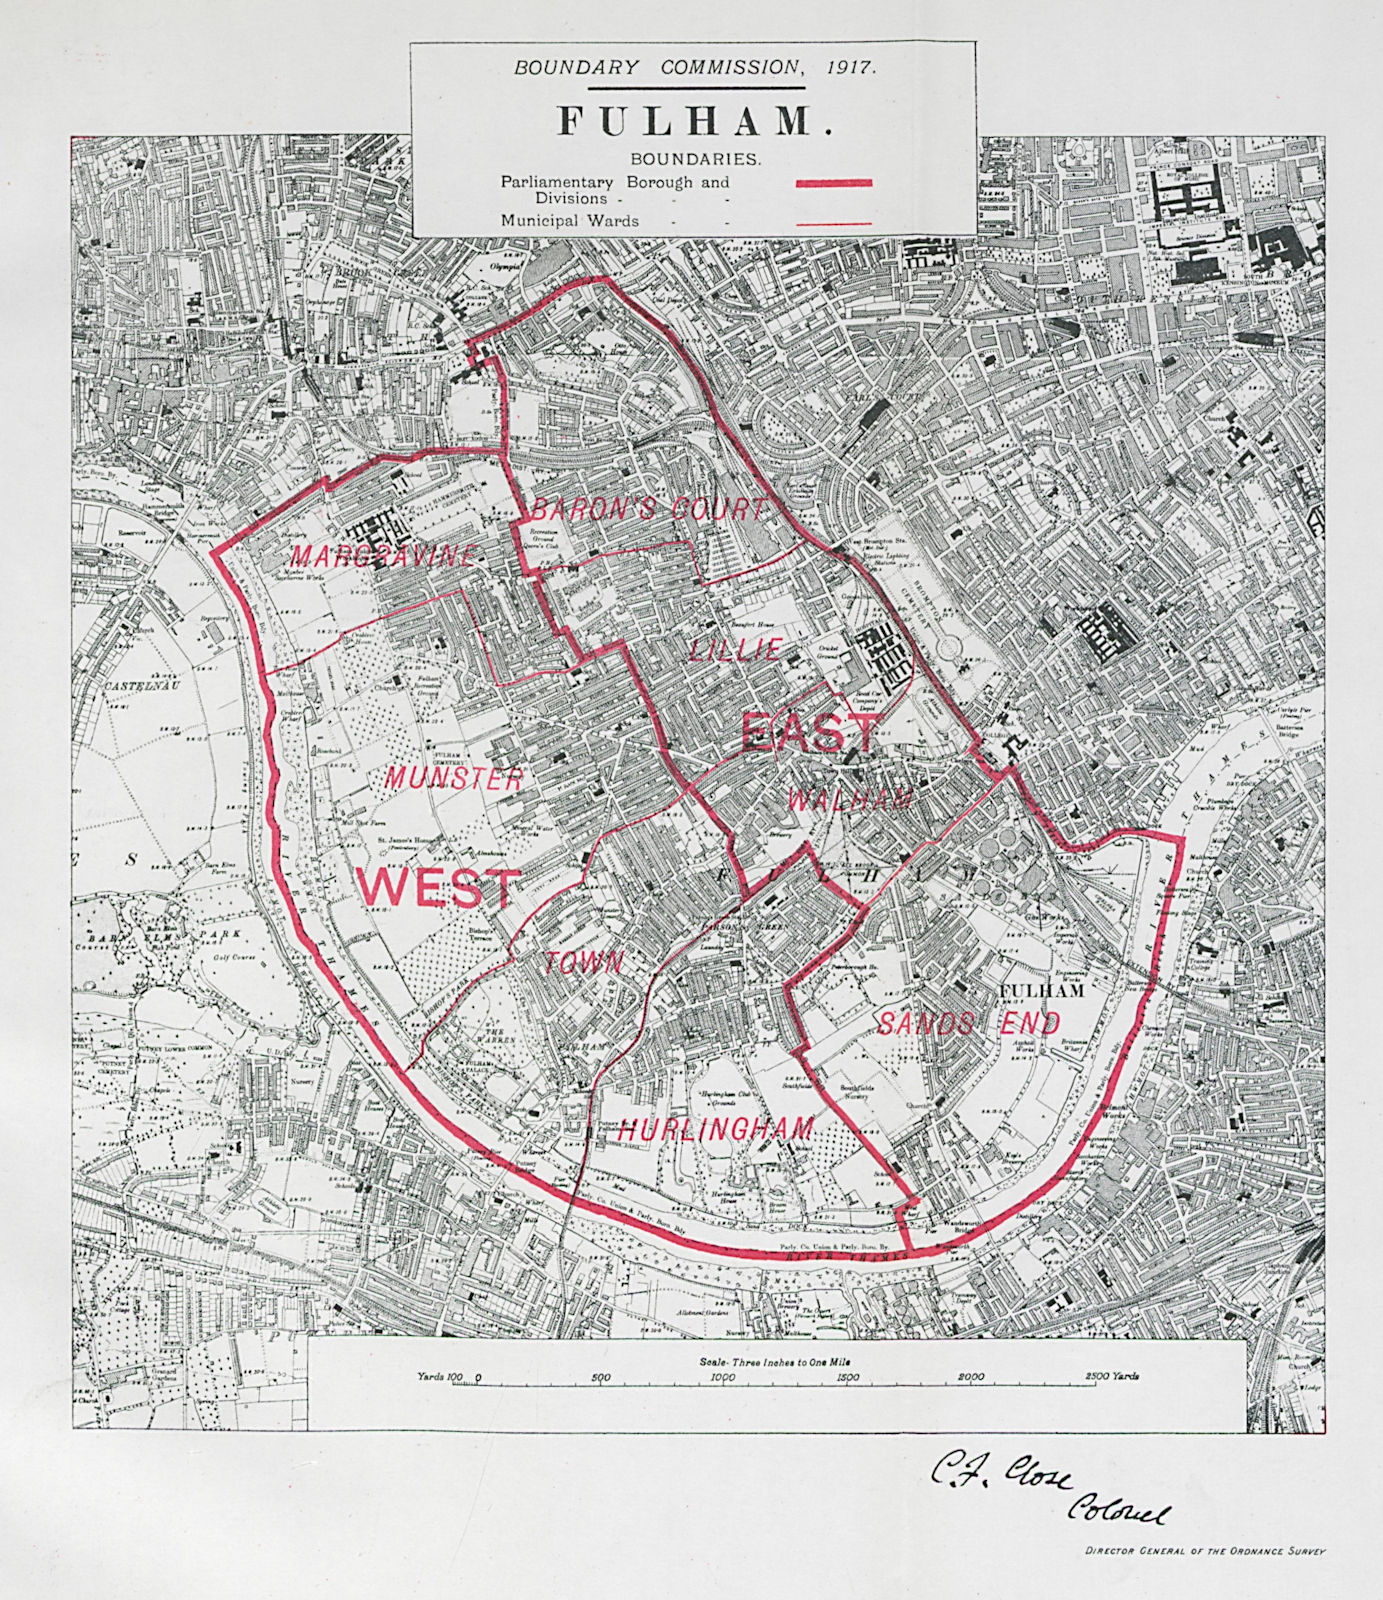 Fulham Parliamentary Borough. Baron's Court. BOUNDARY COMMISSION 1917 old map